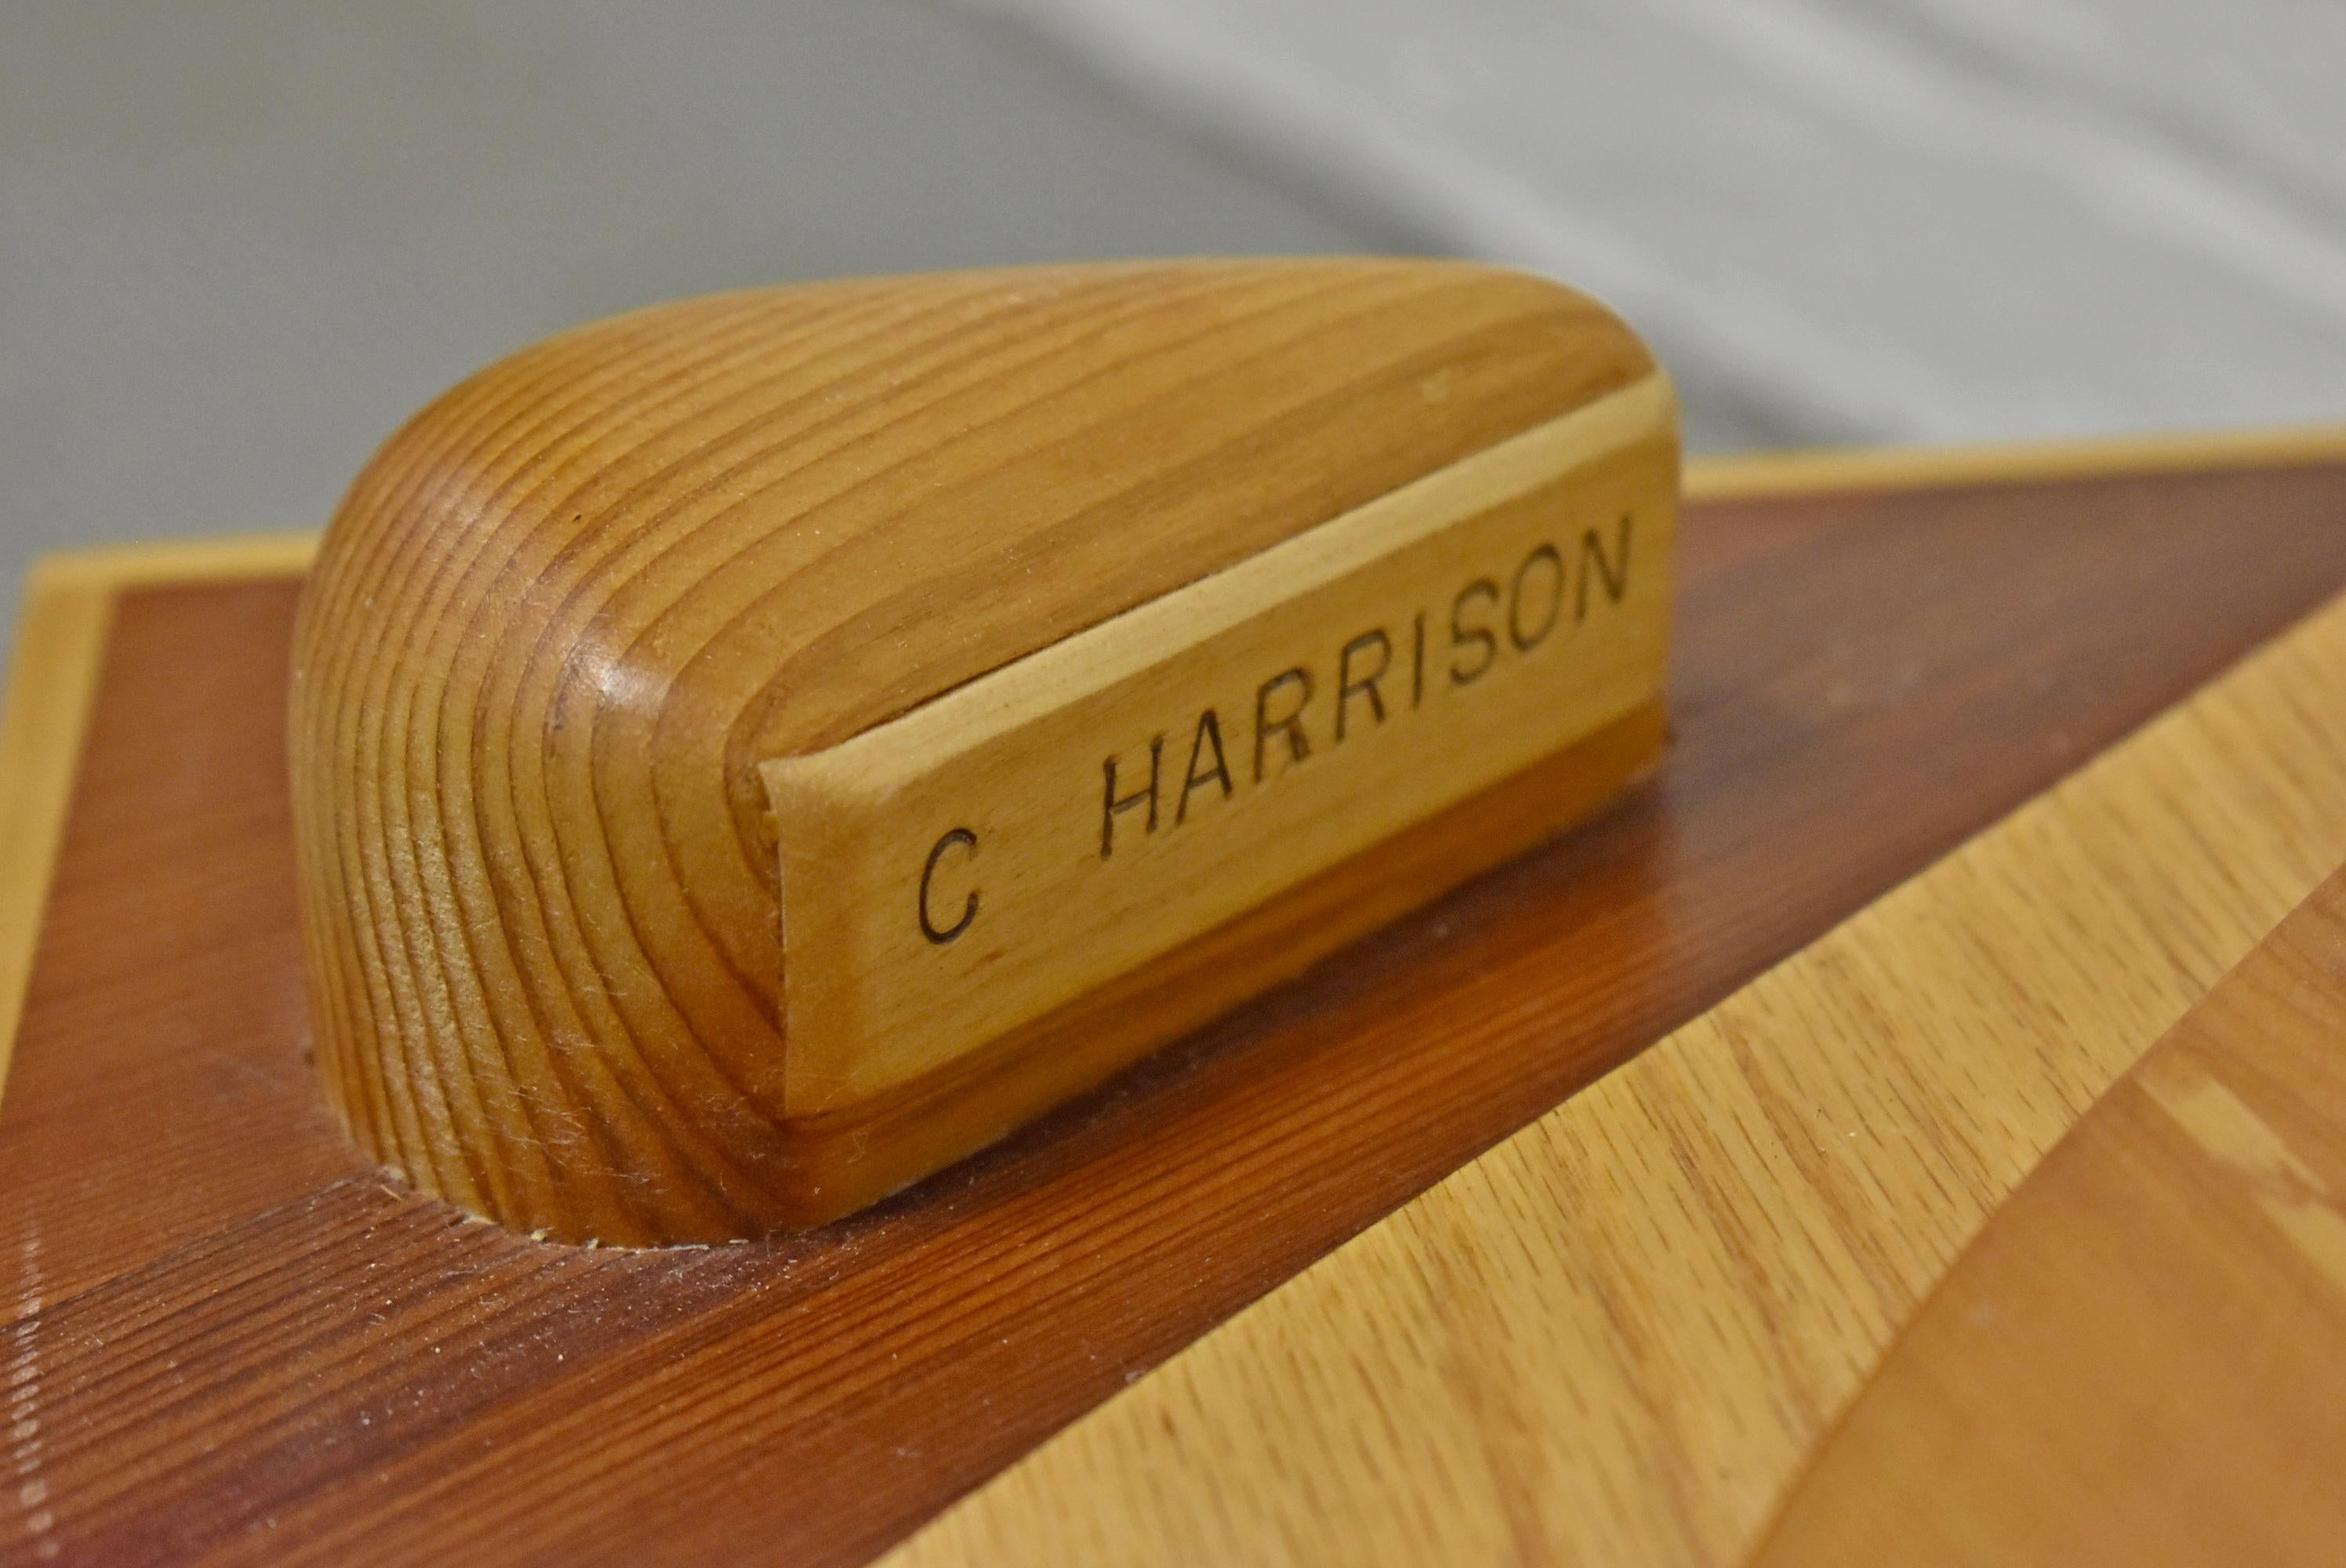 Wooden Sculpture by C. Harrison For Sale 3